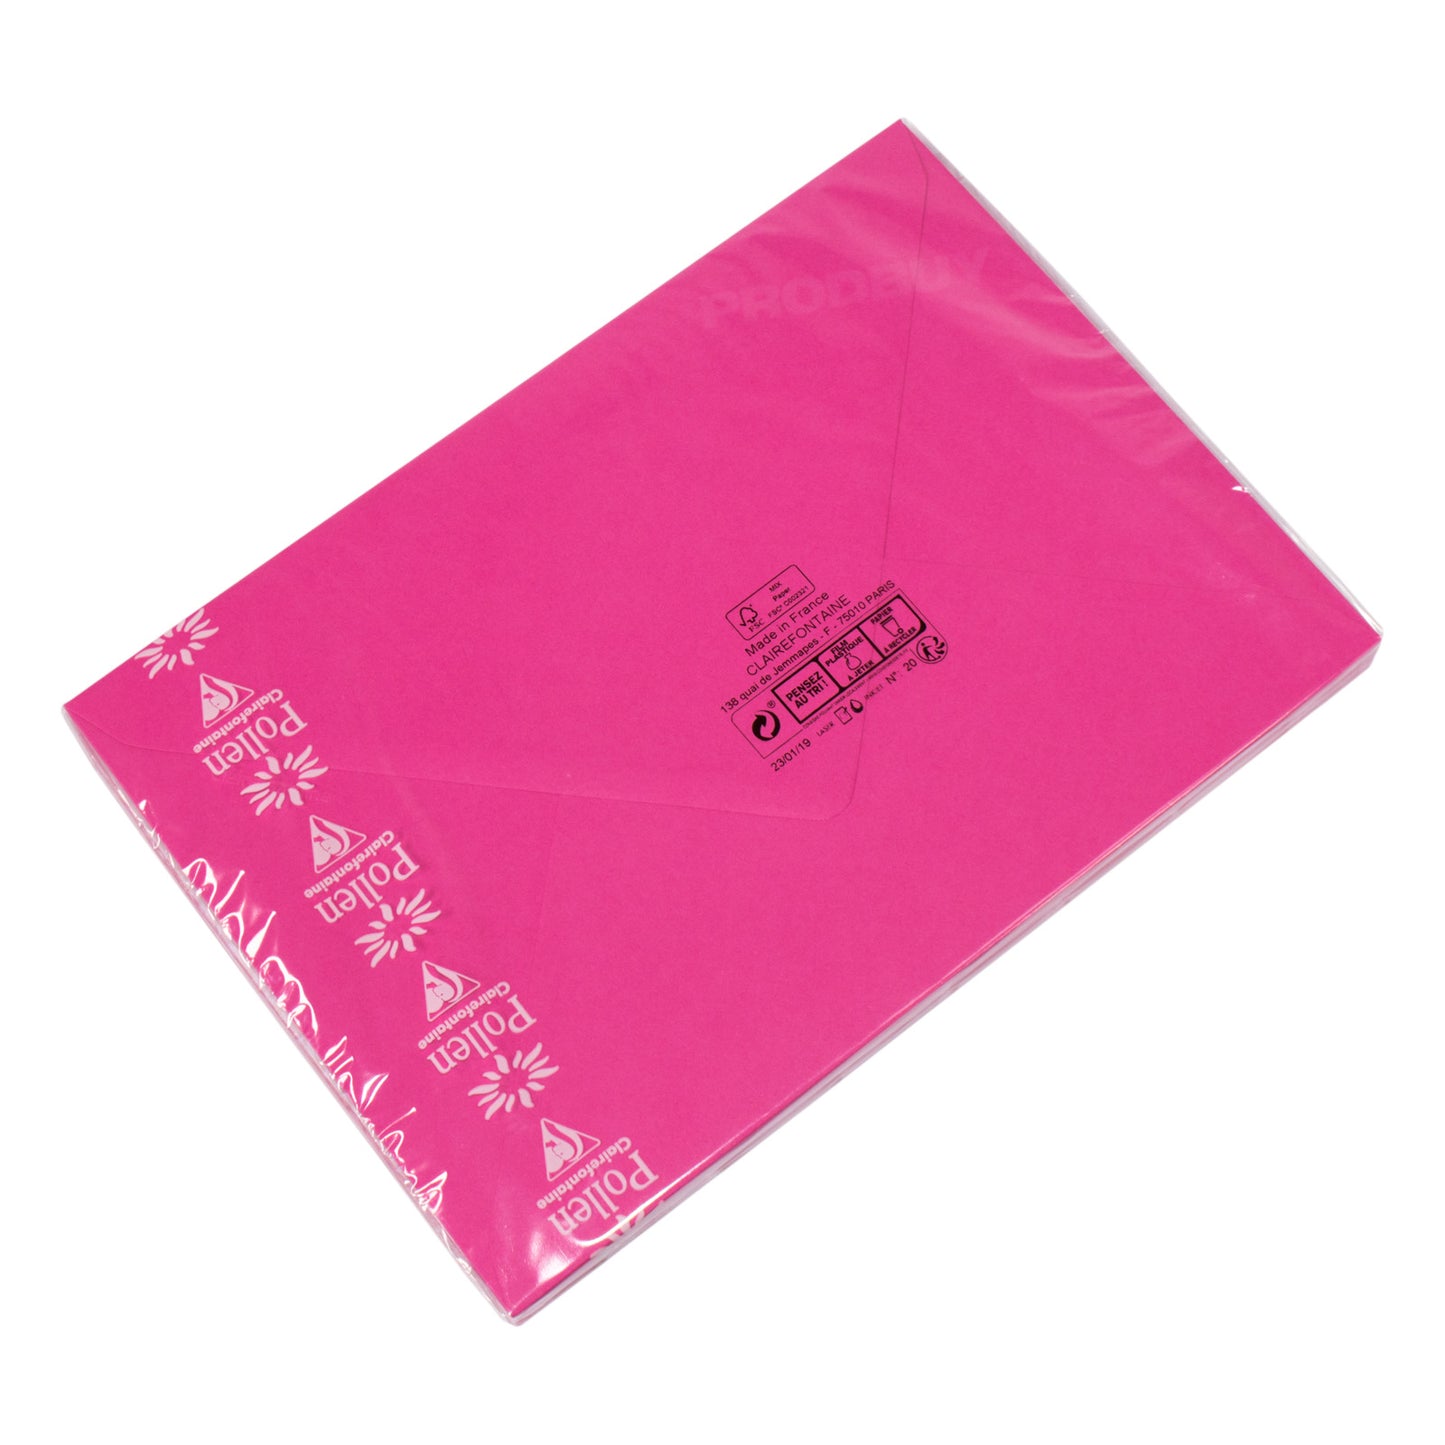 Set of 40 High Quality Plain C5 Envelopes 120gsm with 'Rose Fuchsia' Pink Colour